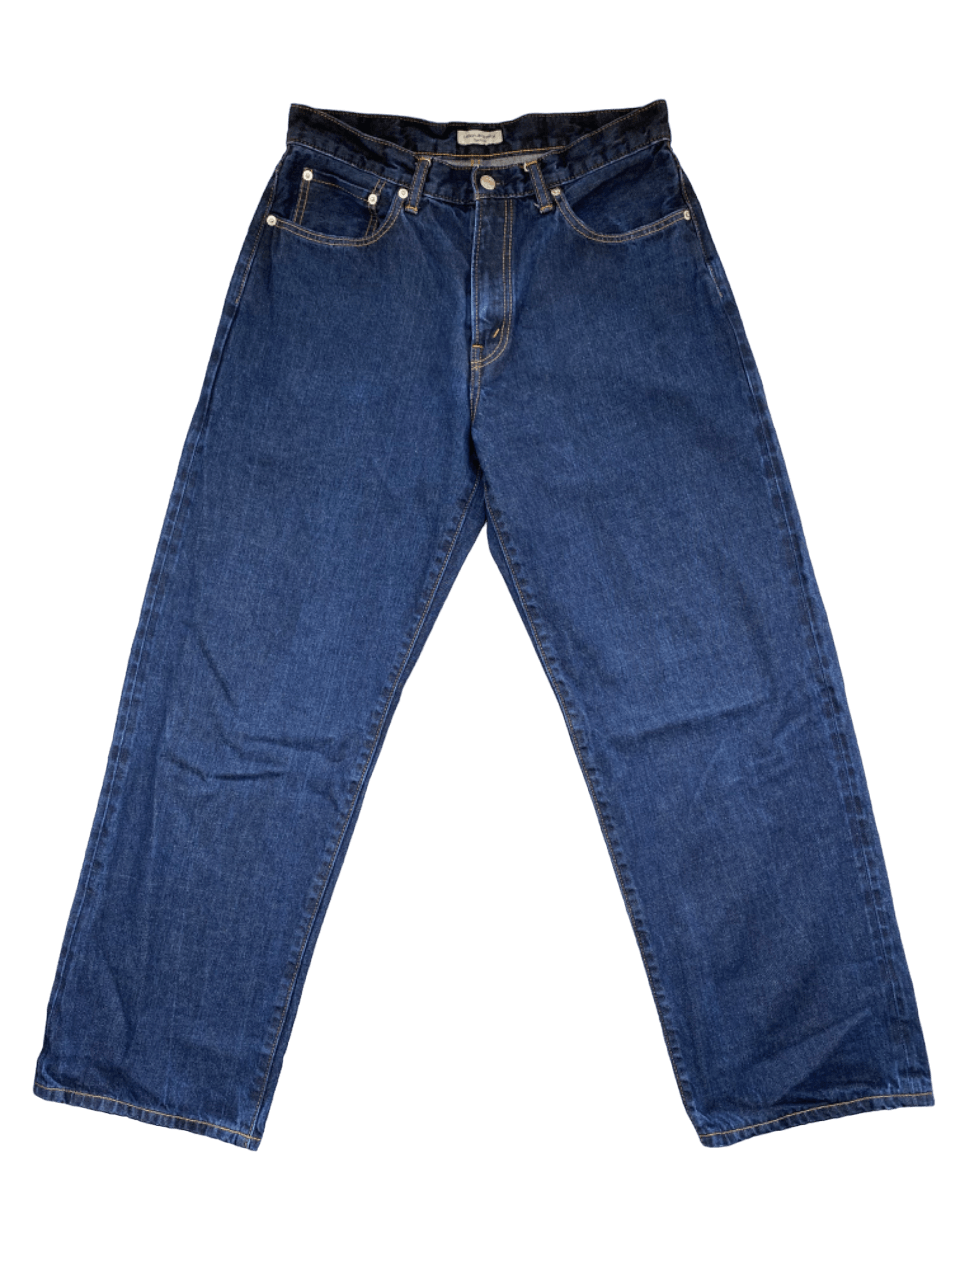 Japanese Brand Urban Research Selvedge Baggy Jeans Japan | Grailed